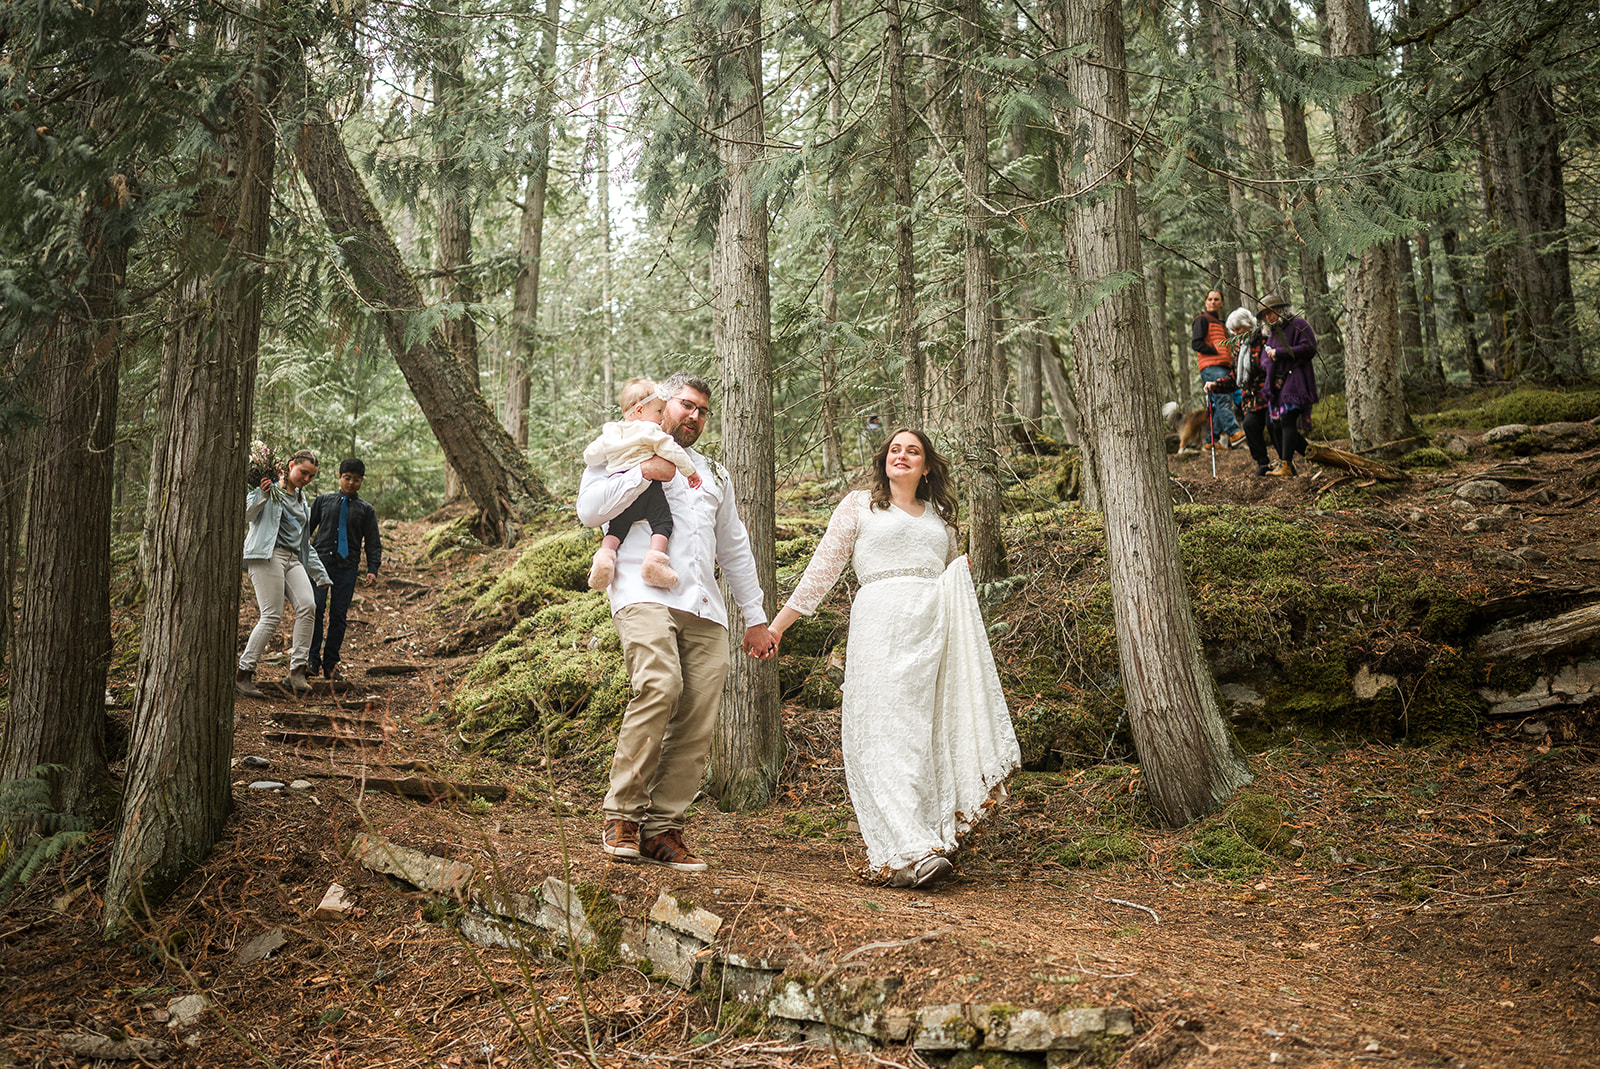 the bride and groom walking down the forest path, guests in the background